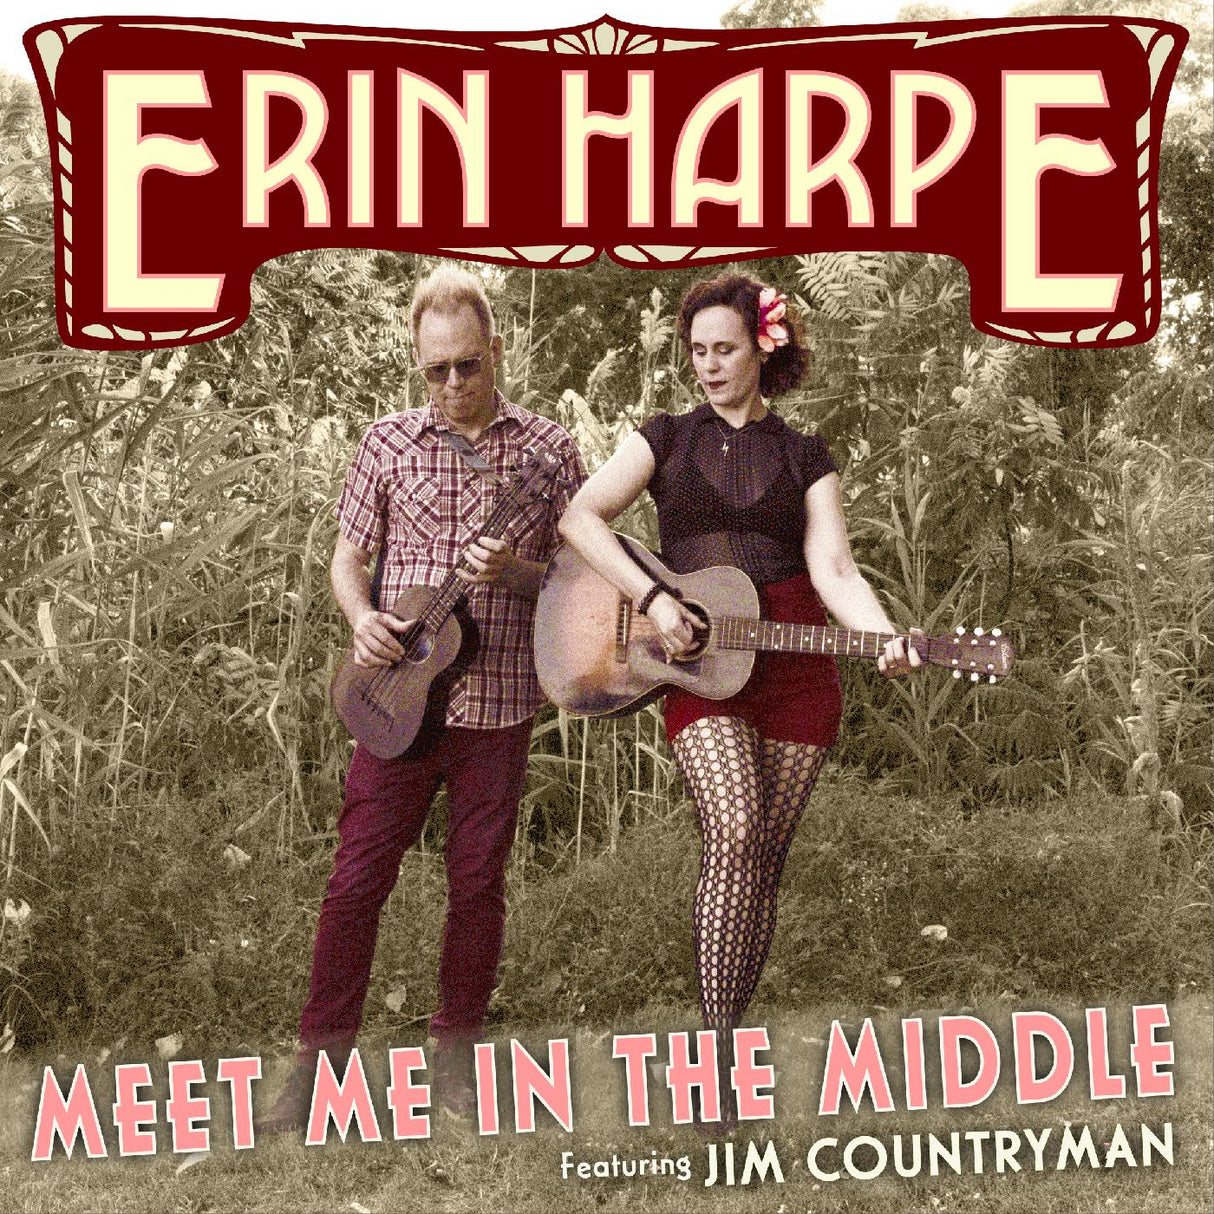 Erin Harpe - Meet Me In The Middle [CD]